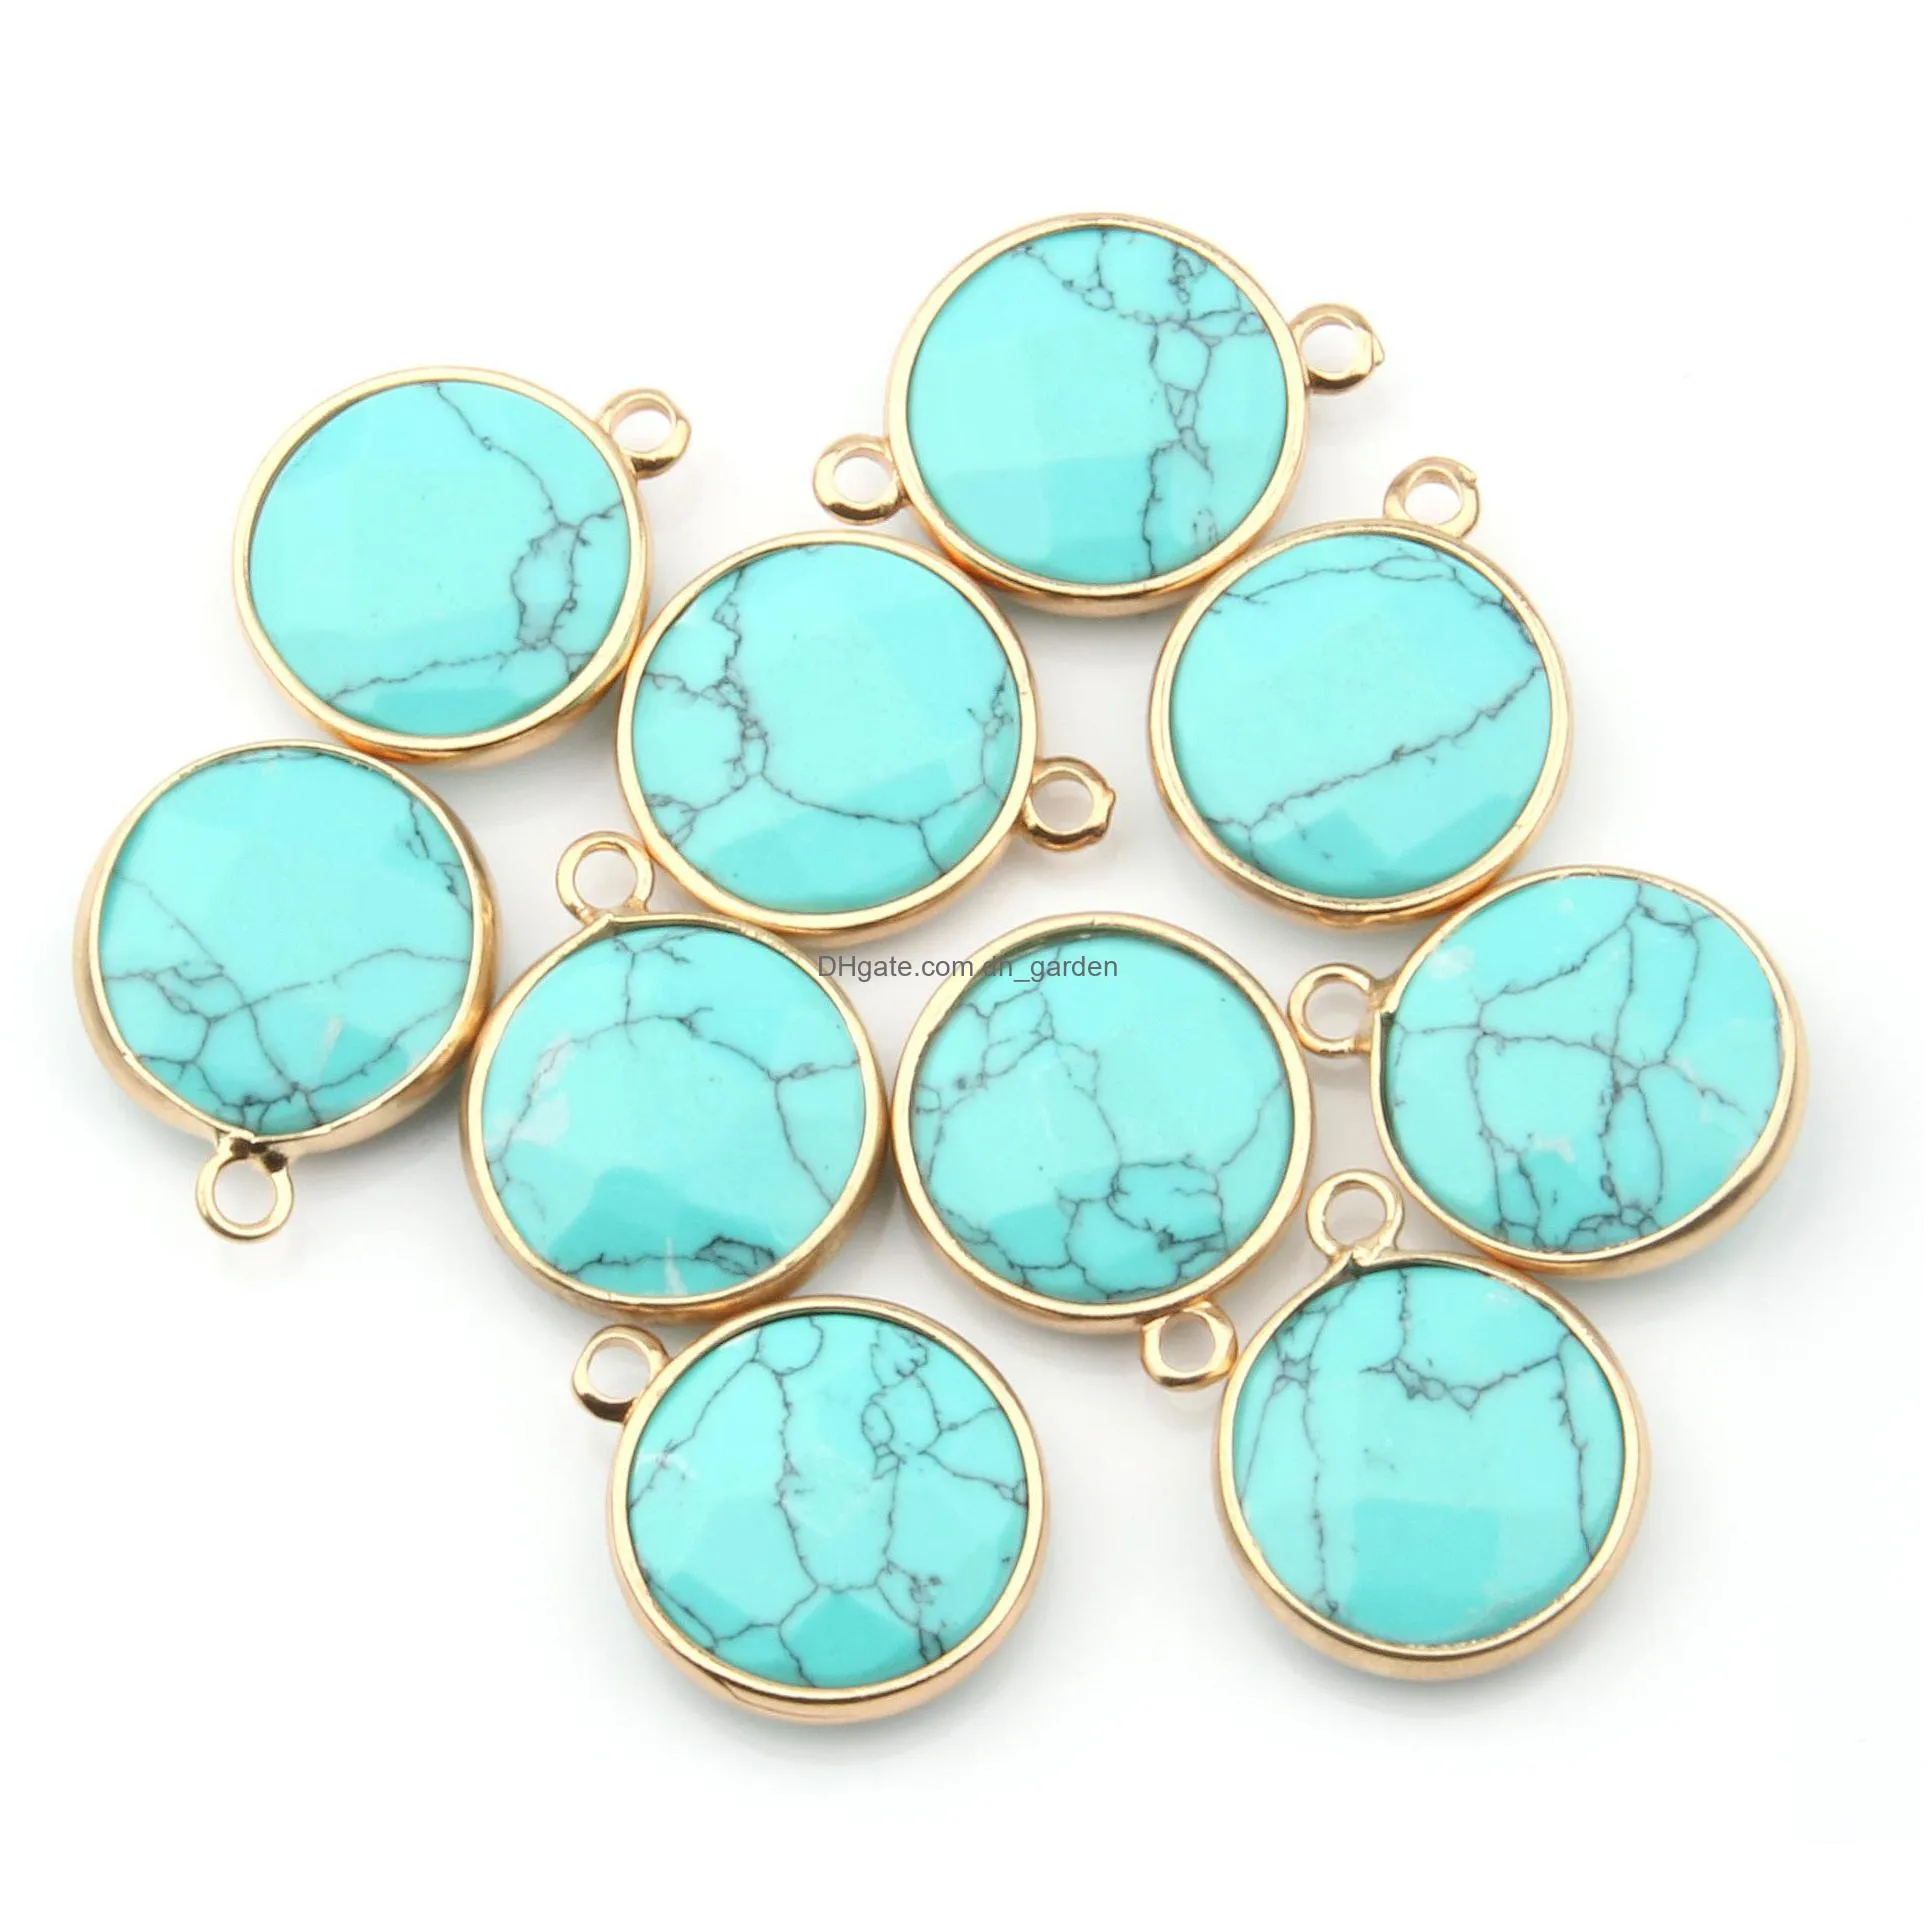 faceted round shape natural stone charms healing agates crystal turquoises jades opal stones pendant for jewelry making necklace bracelet